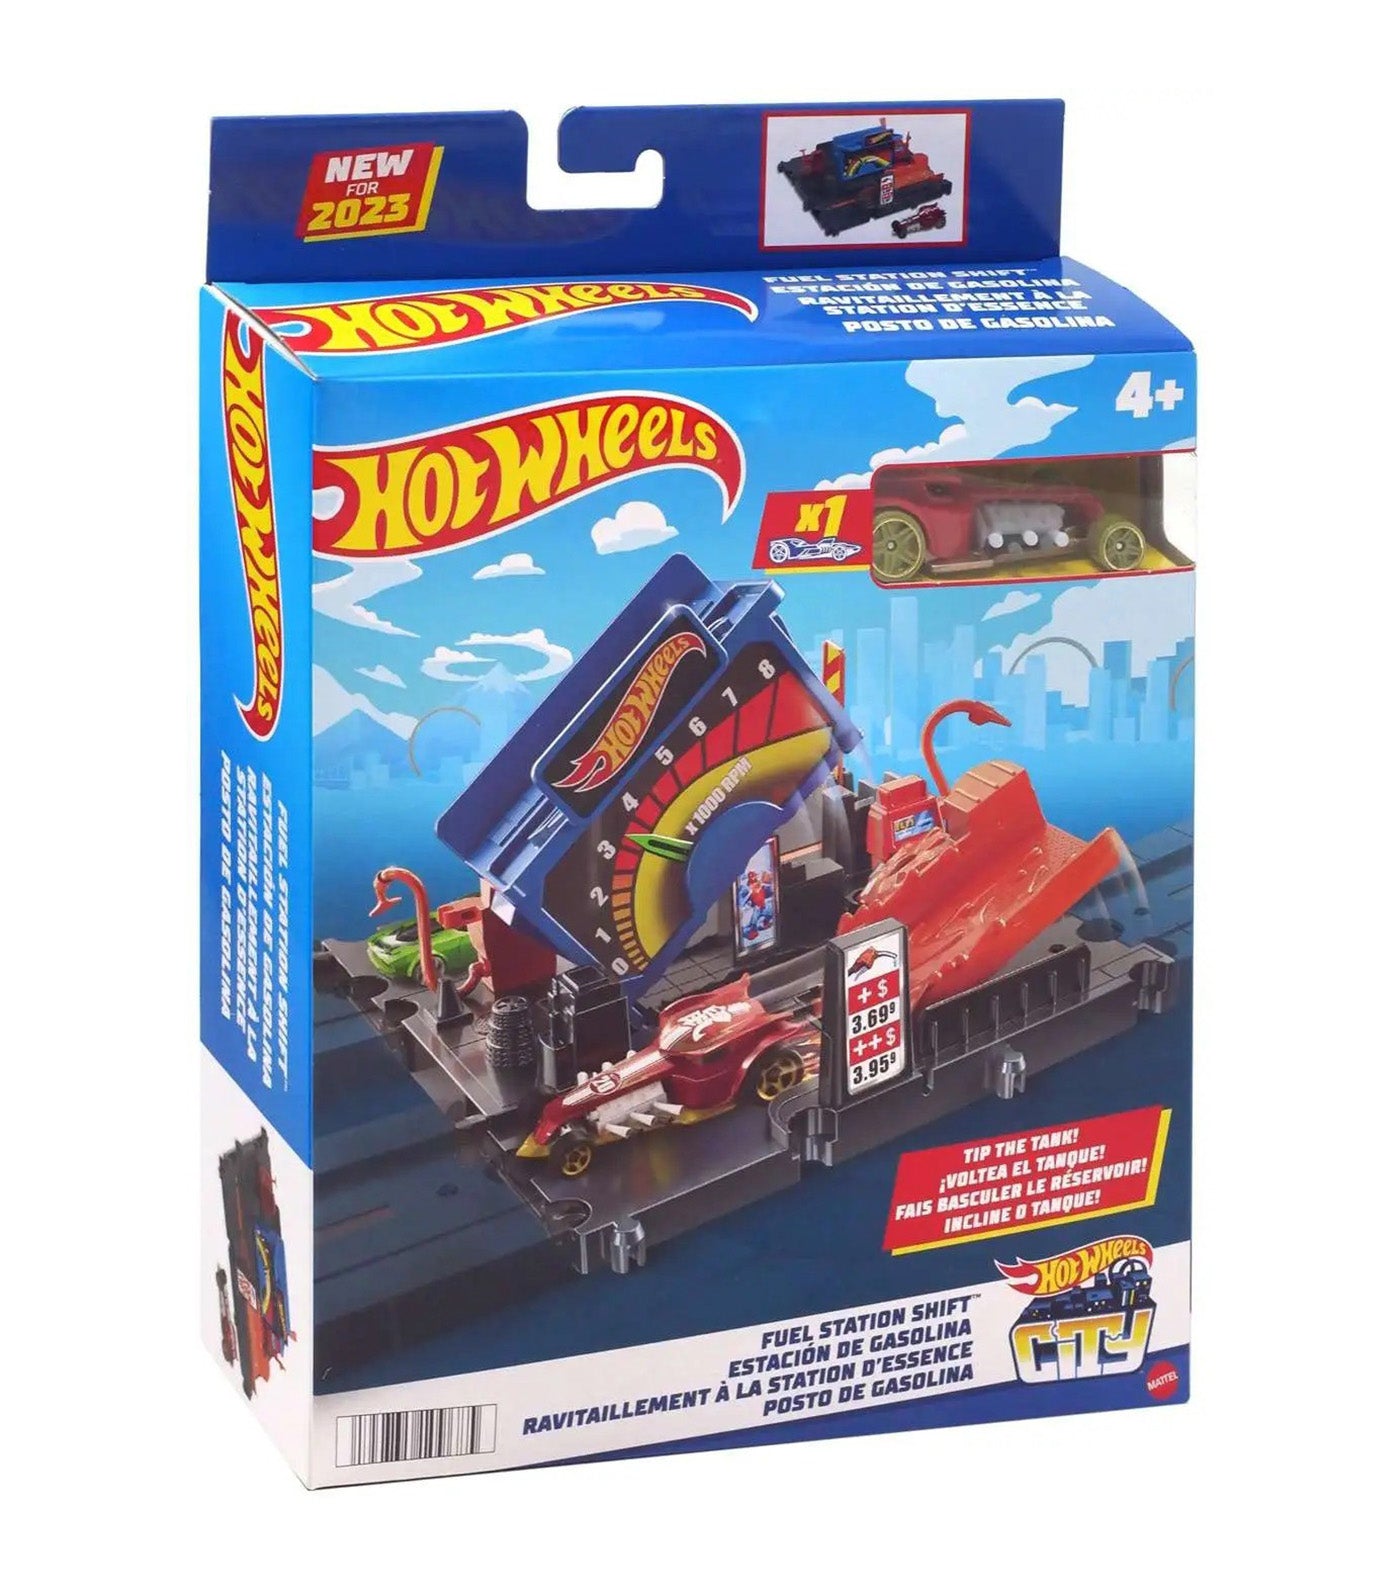 New MATTEL Hot Wheels Launcher & Extension - RED or Blue my choice